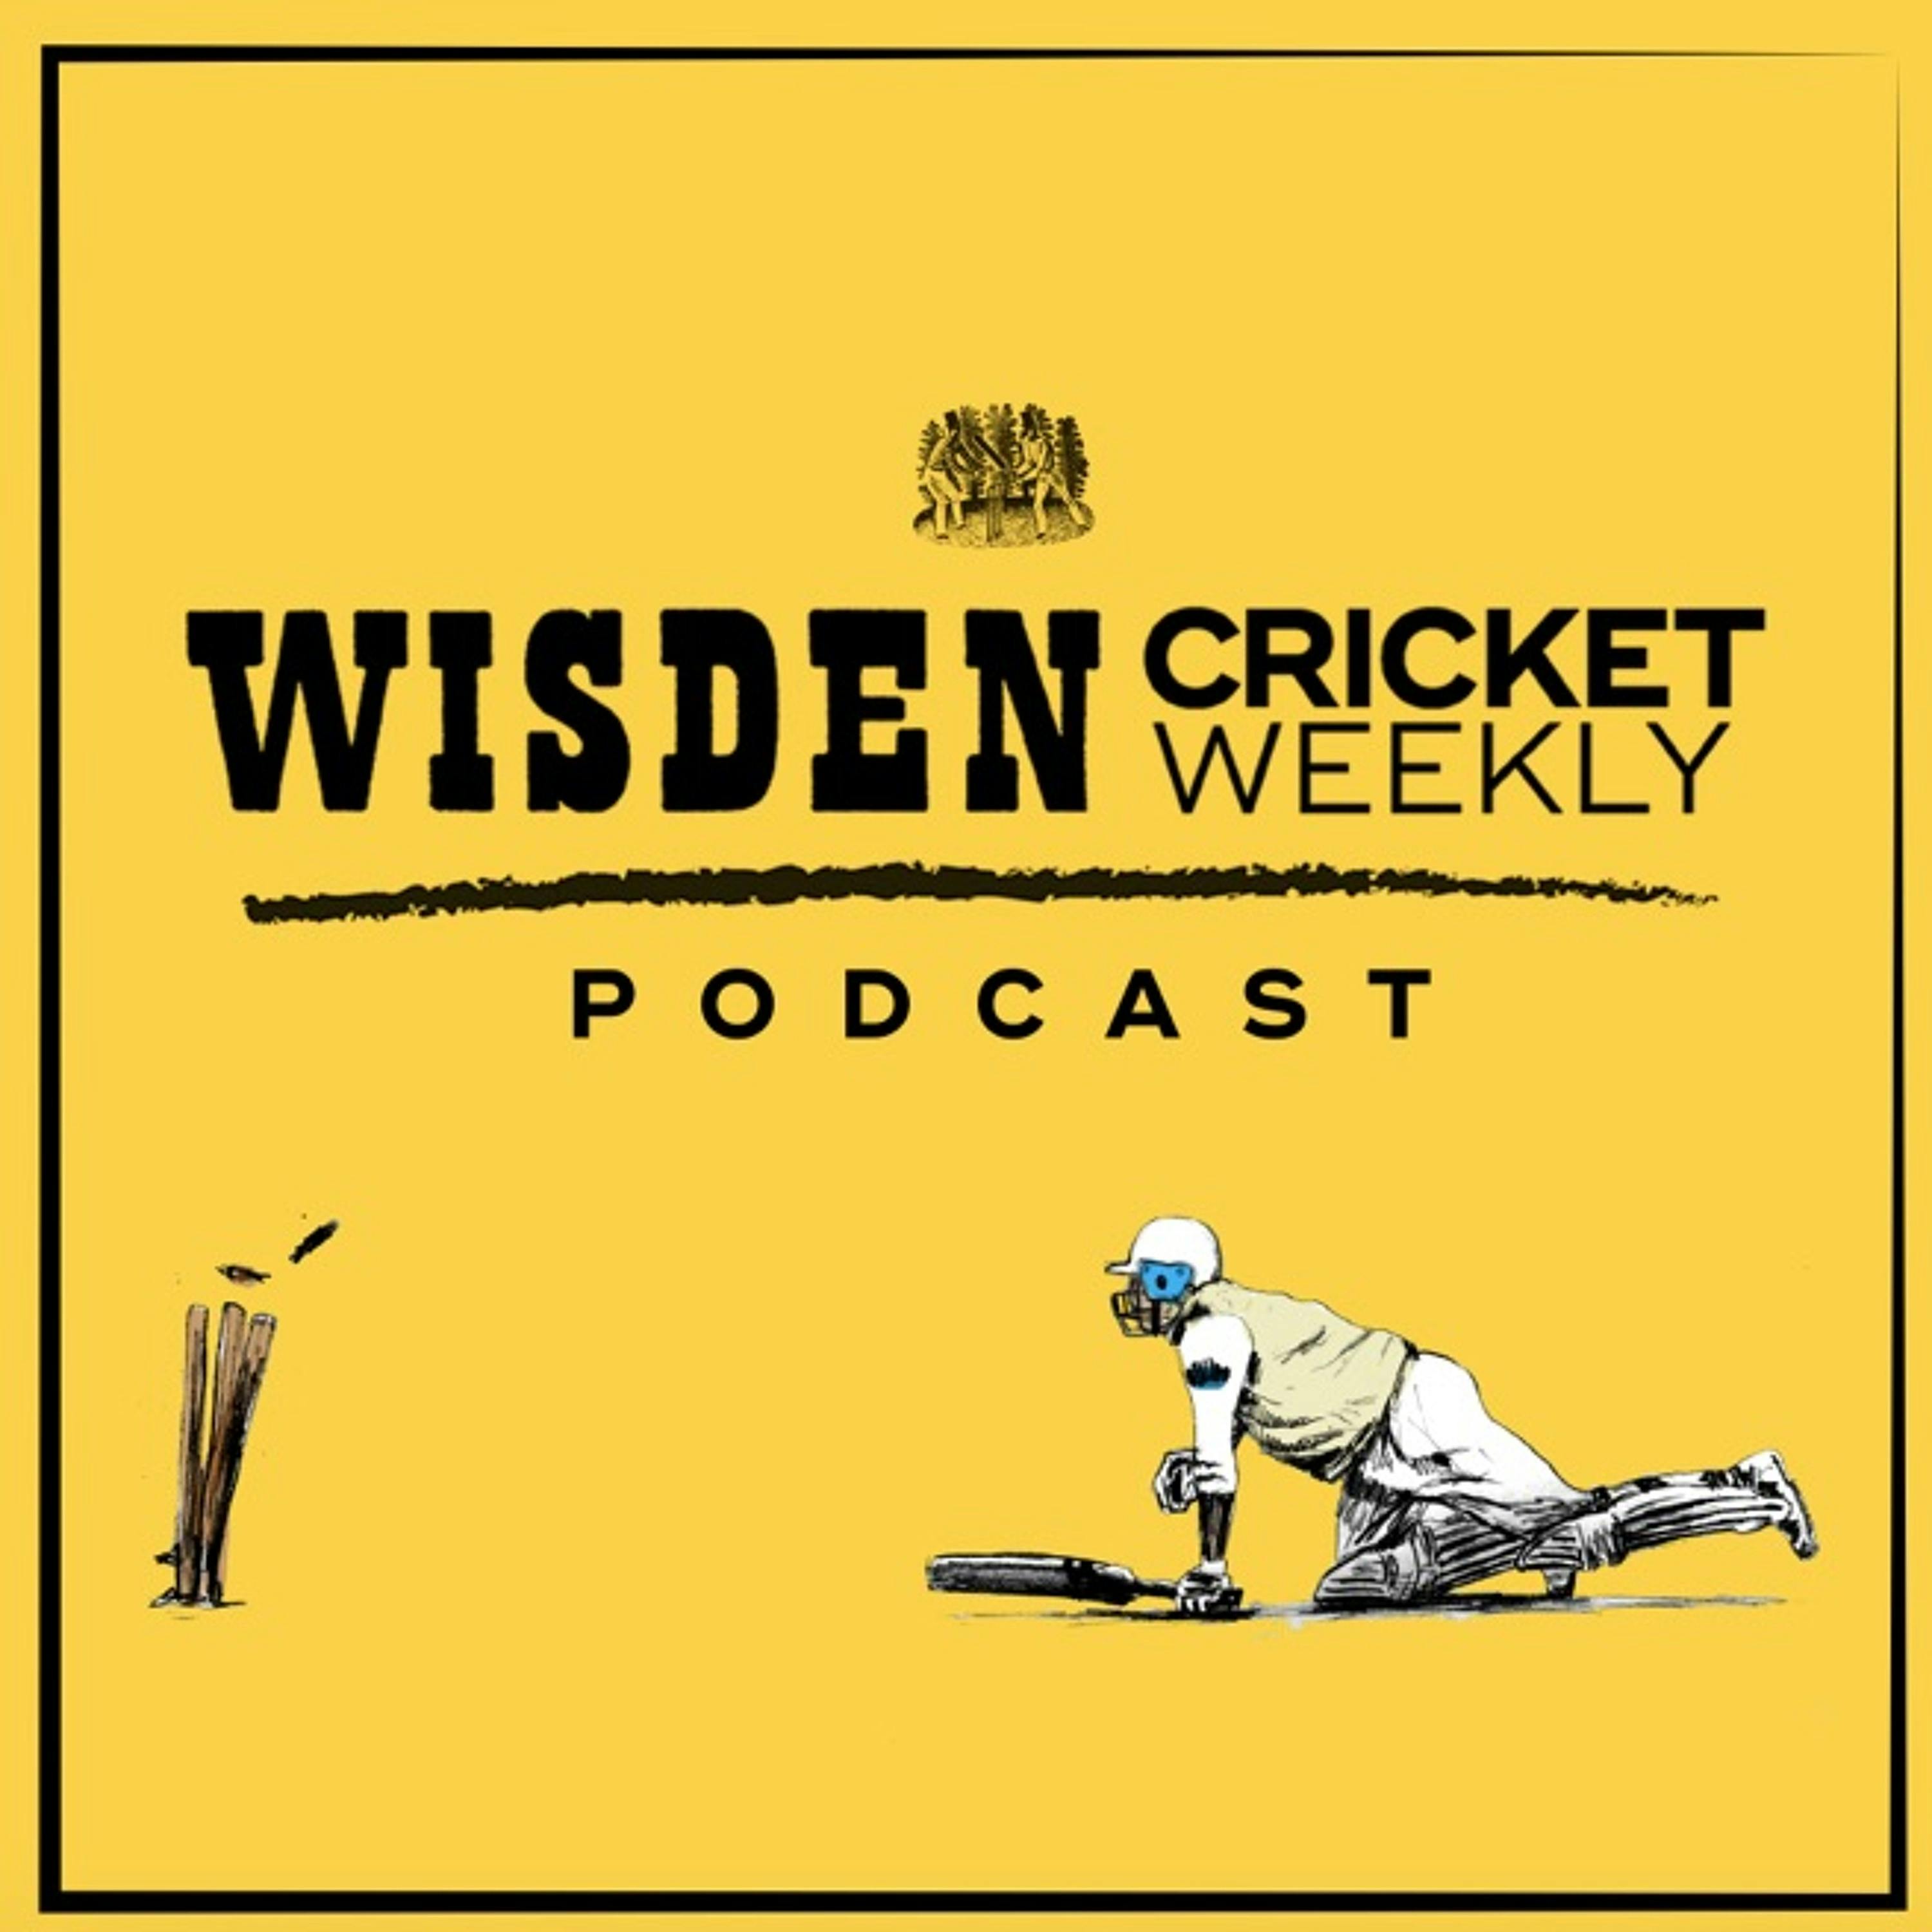 Episode 14 – KP, Dhoni's World Cup hopes and football vs cricket